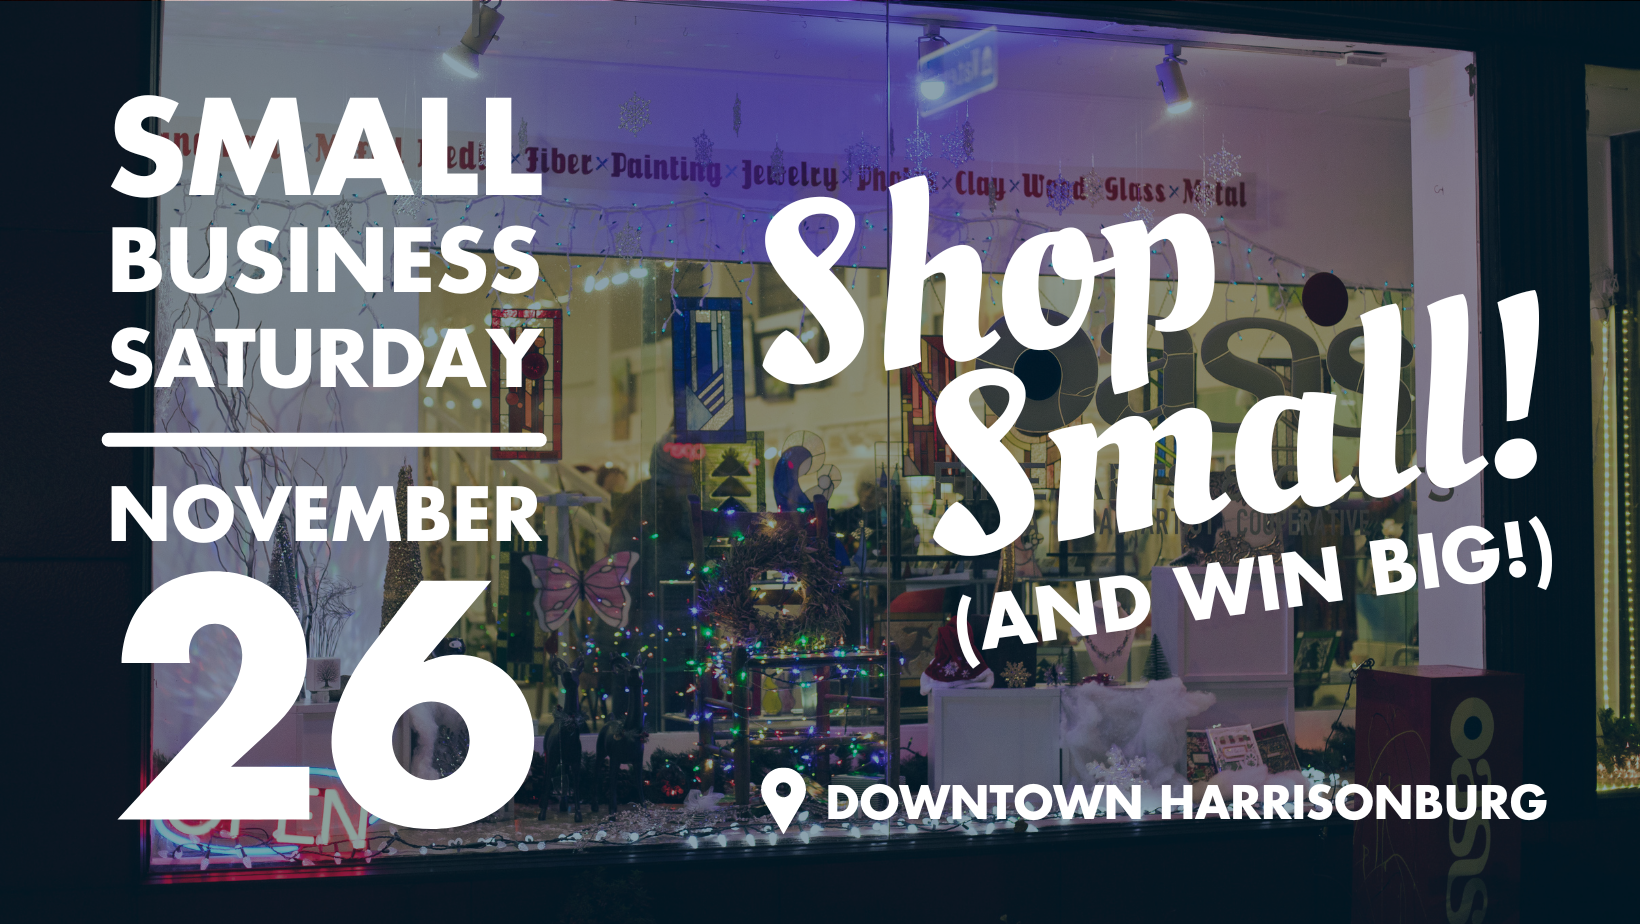 https://downtownharrisonburg.org/wp-content/uploads/2022/10/Small-Business-Saturday-FB-Event-Facebook-Cover-1.png